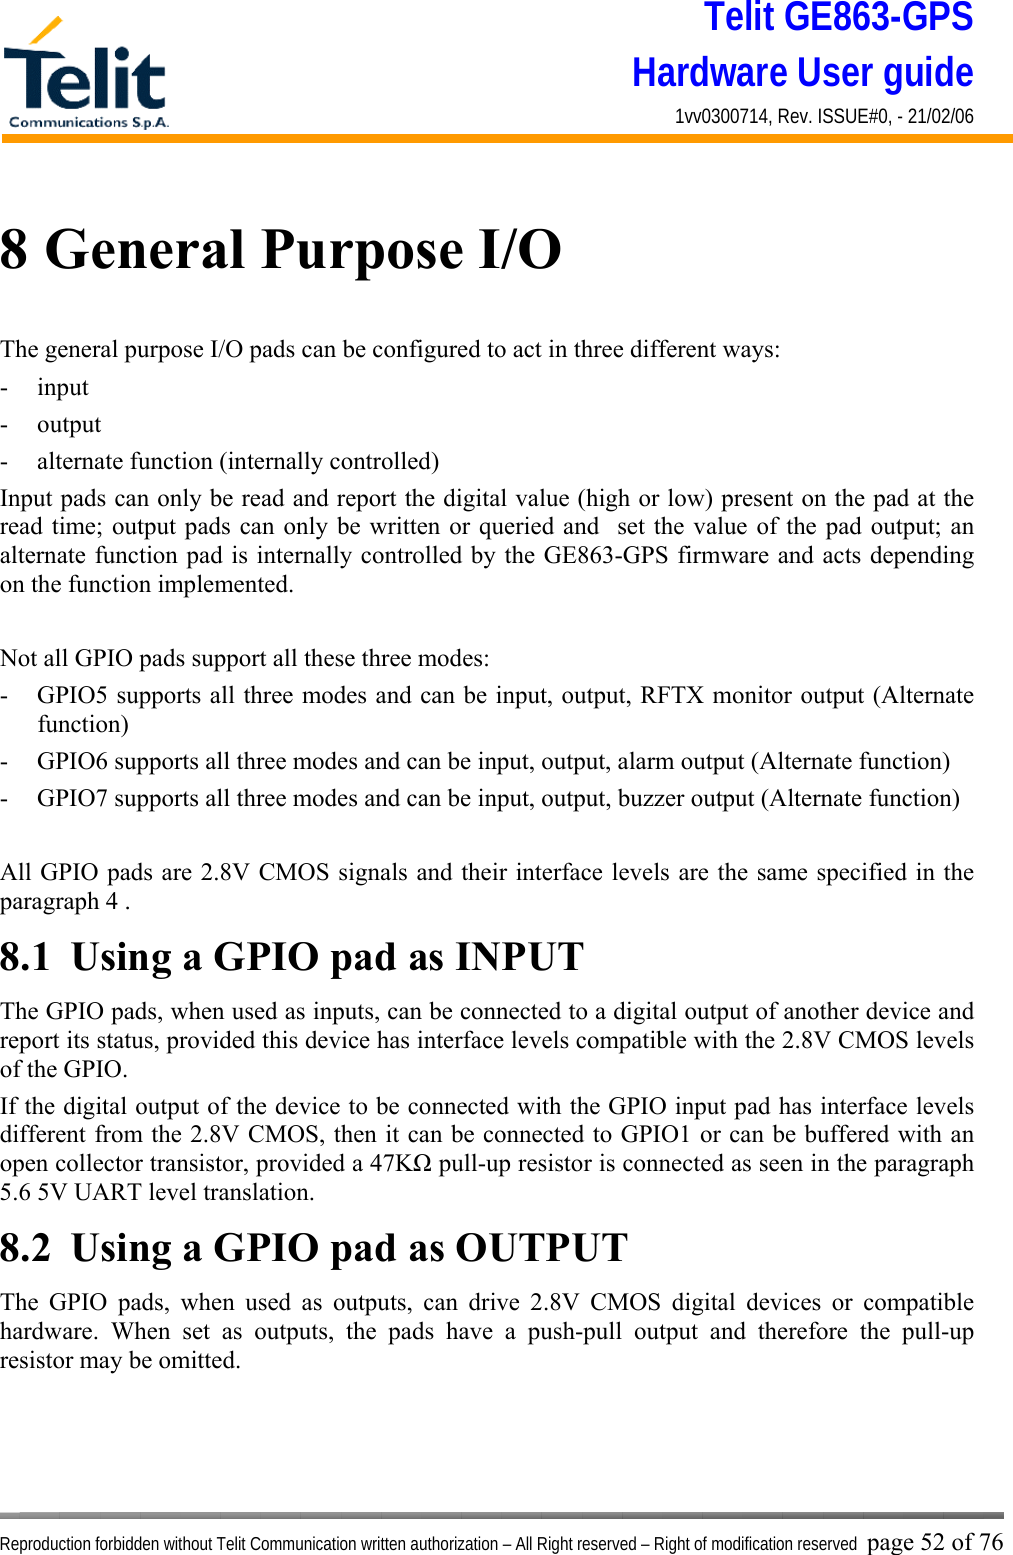 Telit GE863-GPS Hardware User guide 1vv0300714, Rev. ISSUE#0, - 21/02/06    Reproduction forbidden without Telit Communication written authorization – All Right reserved – Right of modification reserved page 52 of 76 8 General Purpose I/O The general purpose I/O pads can be configured to act in three different ways: - input - output - alternate function (internally controlled) Input pads can only be read and report the digital value (high or low) present on the pad at the read time; output pads can only be written or queried and  set the value of the pad output; an alternate function pad is internally controlled by the GE863-GPS firmware and acts depending on the function implemented.   Not all GPIO pads support all these three modes: -  GPIO5 supports all three modes and can be input, output, RFTX monitor output (Alternate function) -  GPIO6 supports all three modes and can be input, output, alarm output (Alternate function) -  GPIO7 supports all three modes and can be input, output, buzzer output (Alternate function)  All GPIO pads are 2.8V CMOS signals and their interface levels are the same specified in the paragraph 4 . 8.1  Using a GPIO pad as INPUT The GPIO pads, when used as inputs, can be connected to a digital output of another device and report its status, provided this device has interface levels compatible with the 2.8V CMOS levels of the GPIO.  If the digital output of the device to be connected with the GPIO input pad has interface levels different from the 2.8V CMOS, then it can be connected to GPIO1 or can be buffered with an open collector transistor, provided a 47KΩ pull-up resistor is connected as seen in the paragraph 5.6 5V UART level translation. 8.2  Using a GPIO pad as OUTPUT The GPIO pads, when used as outputs, can drive 2.8V CMOS digital devices or compatible hardware. When set as outputs, the pads have a push-pull output and therefore the pull-up resistor may be omitted. 